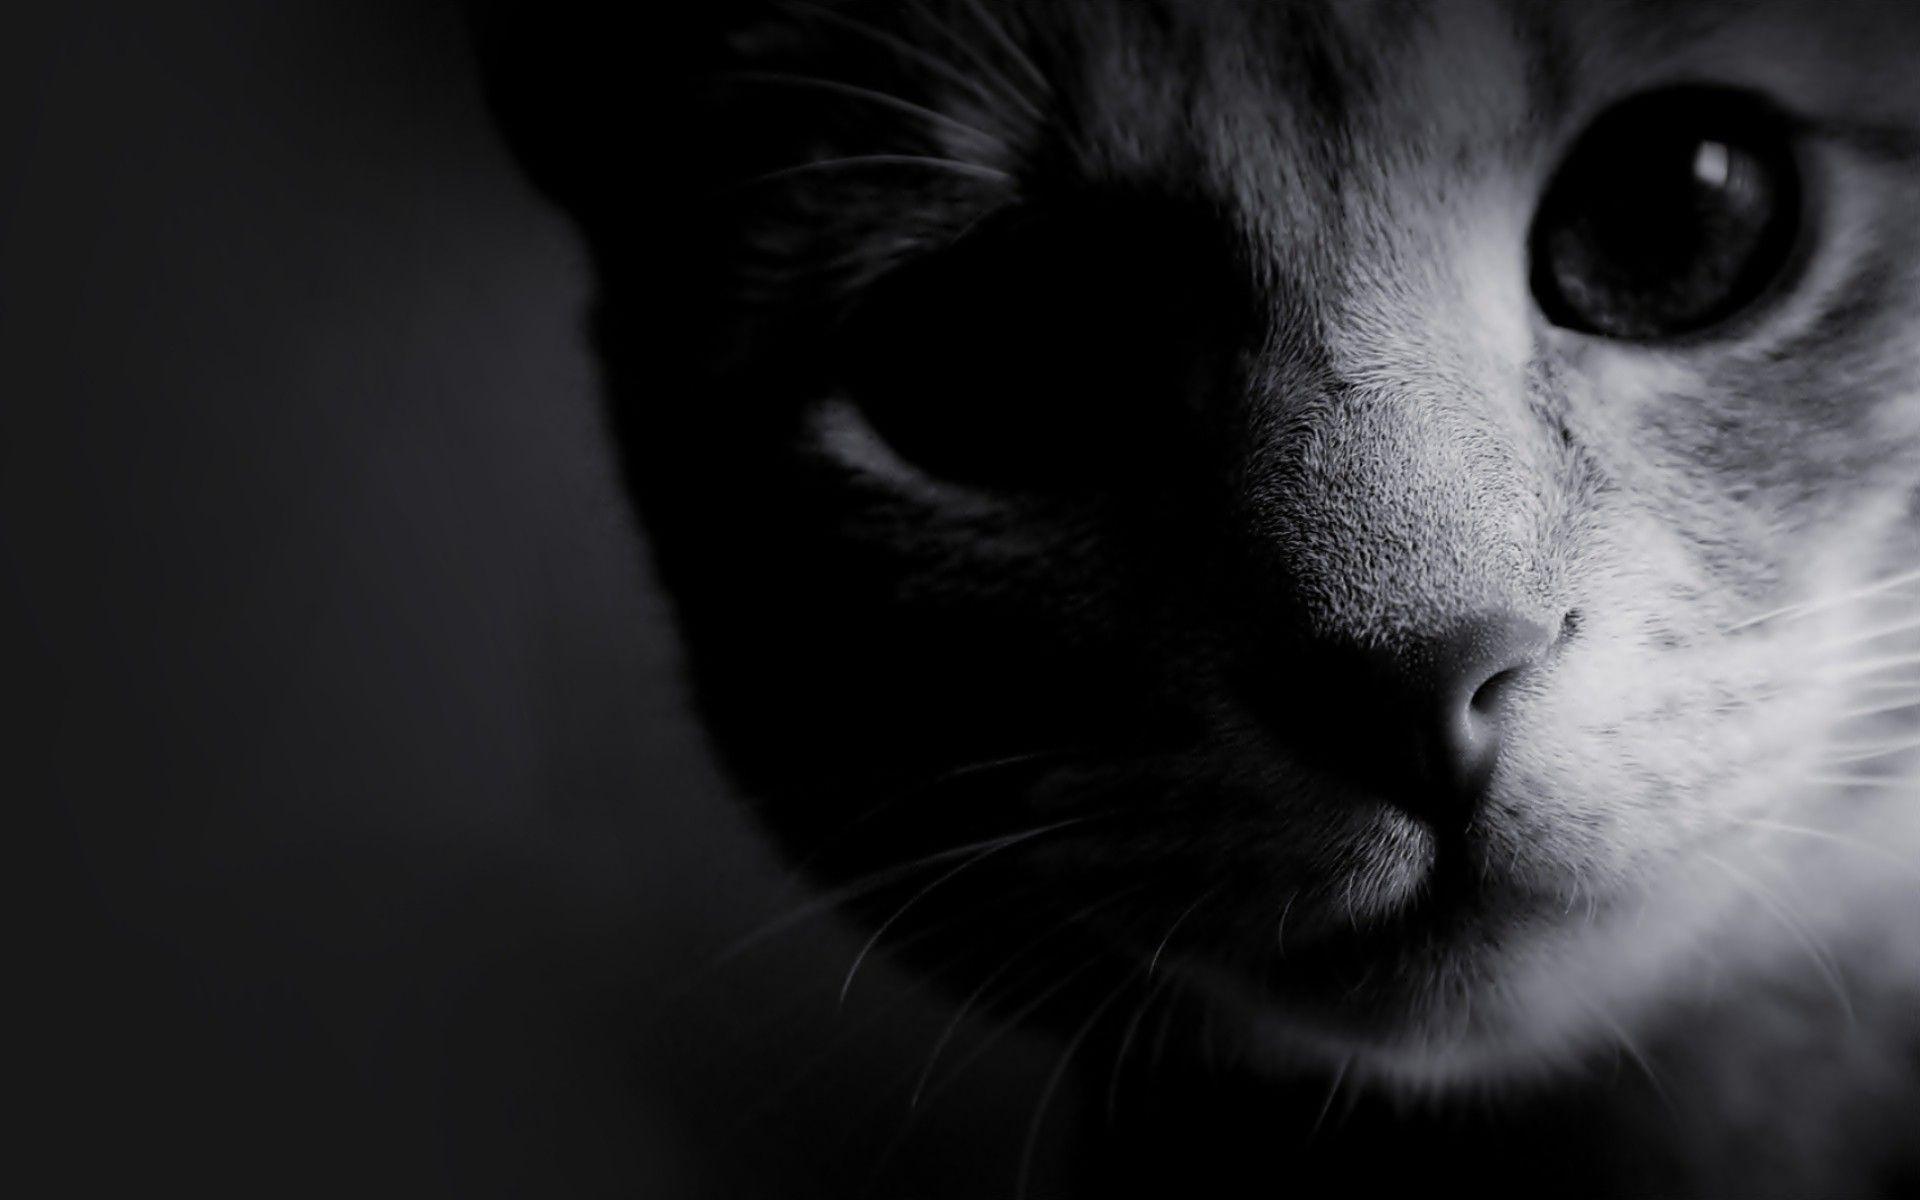 Wallpaper For > Tumblr Background Cats Black And White